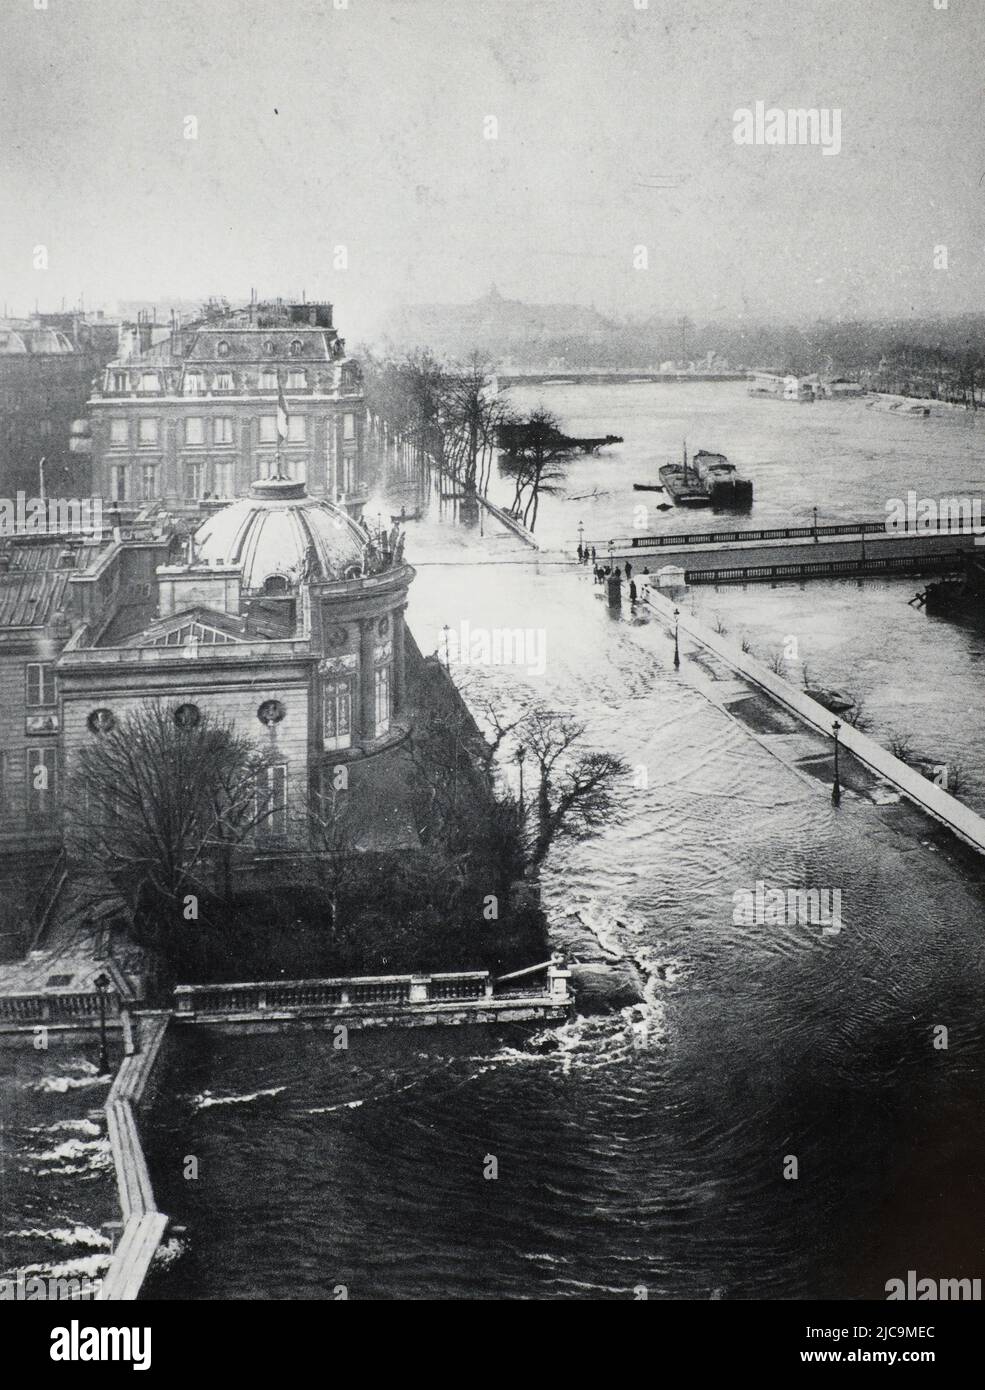 Eng translation : ' THE SOURCE OF THE TORRENT WHICH INVADED THE FAUBOURG SAINT-GERMAIN. The flood gushing from the abyss of the Gare d'Orsay, at the corner of the Legion of Honor, flows in the rue de Bellechasse and towards the rue de Solferino. — Photograph taken from the Palais d'Orsay ' - Original in French : ' LA SOURCE DU TORRENT QUI À ENVAHI LE FAUBOURG SAINT-GERMAIN. Le flot jaillissant du gouffre de la gare d'Orsay, au coin de la Légion d'honneur, s’écoule dans la rue de Bellechasse et vers la rue de Solferino. — Photographie prise du palais d'Orsay, ' - Extract from ' L'Illustration, Stock Photo